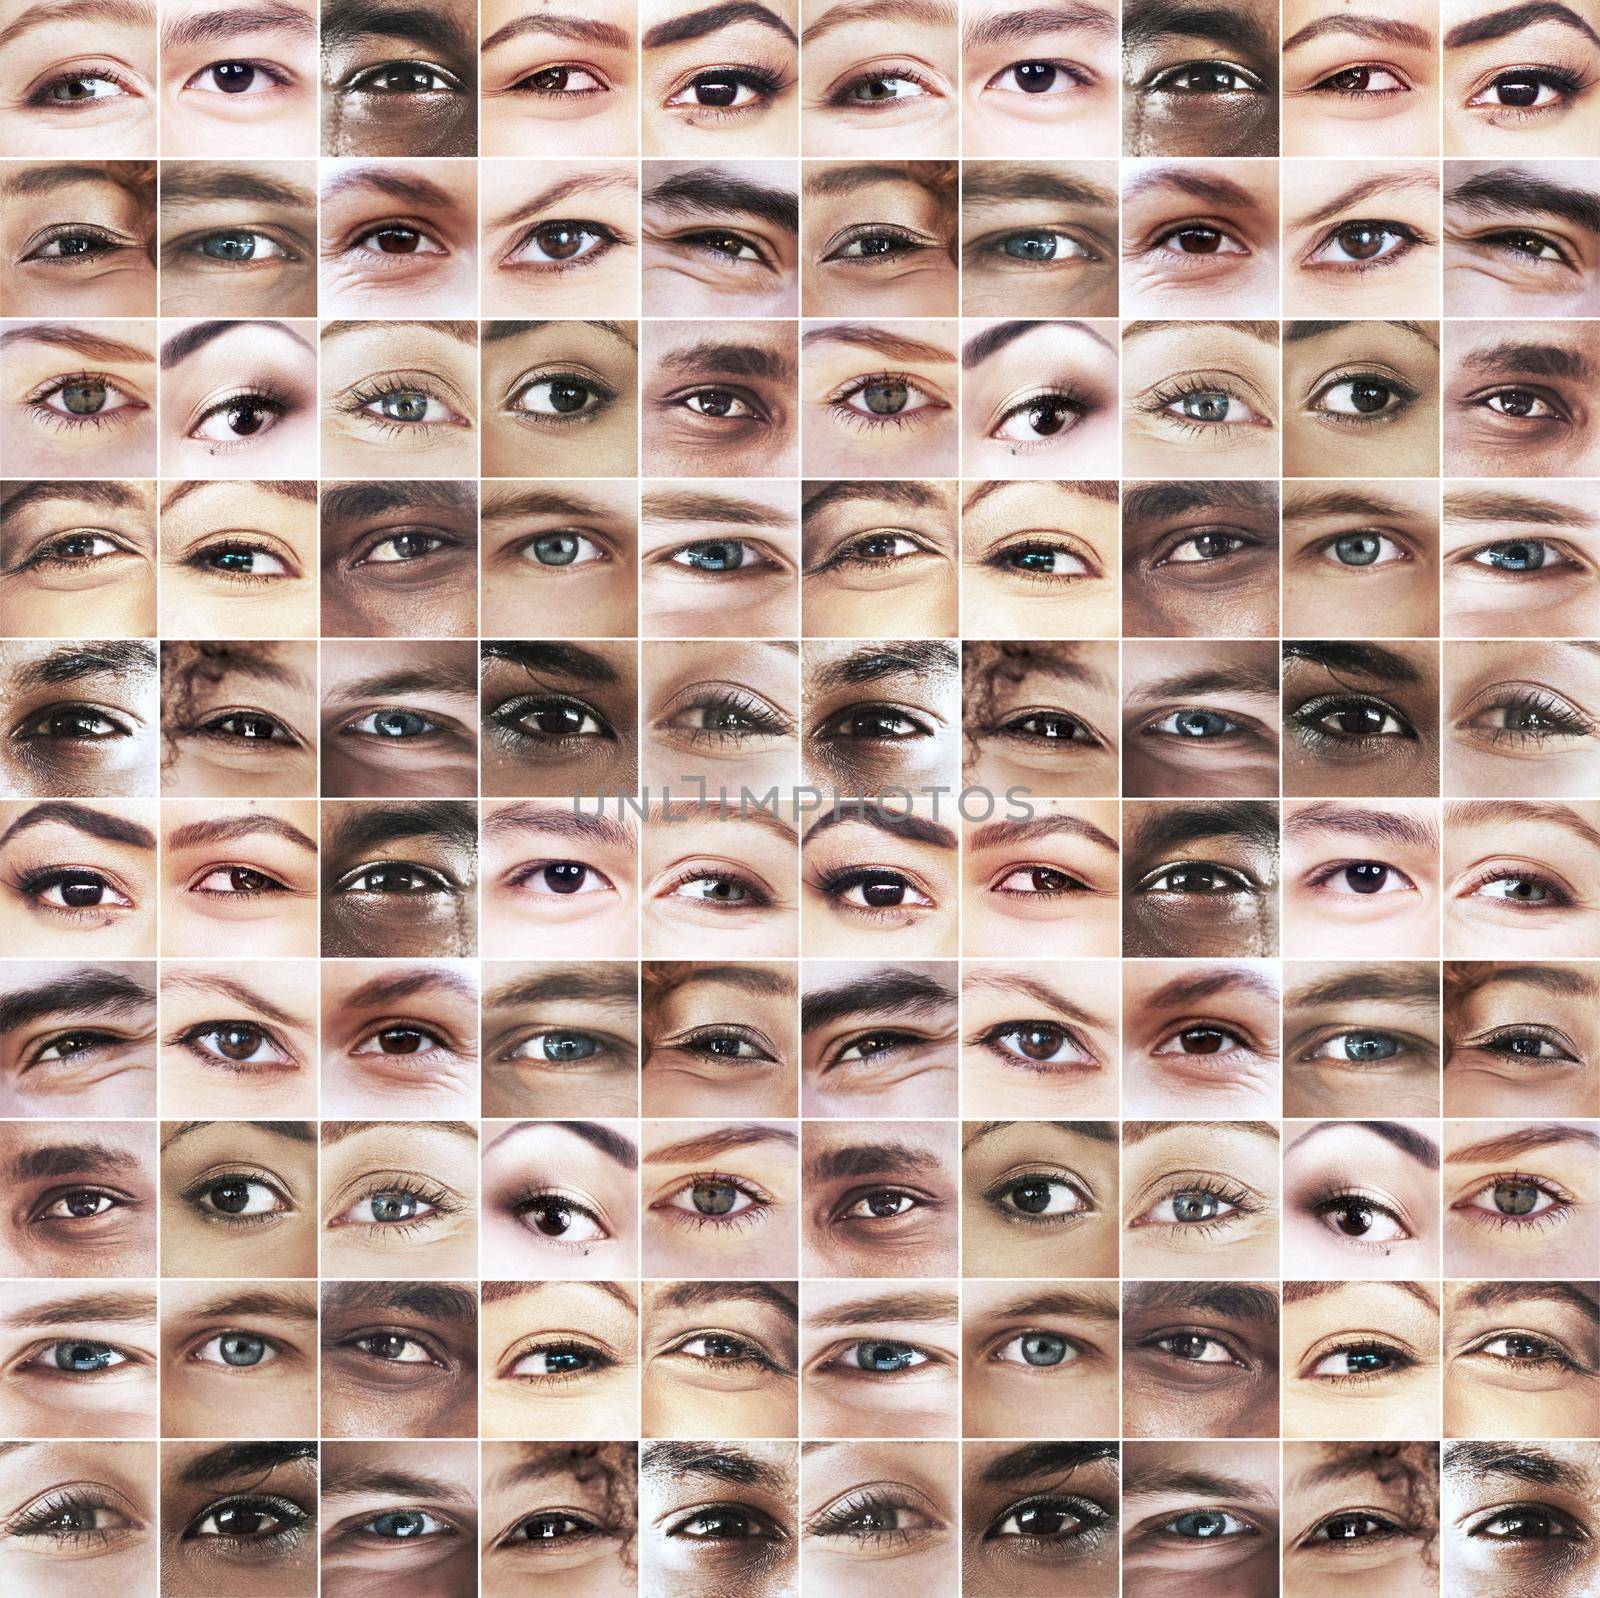 Open your eyes to the beauty of humanity. Composite image of an assortment of peoples eyes